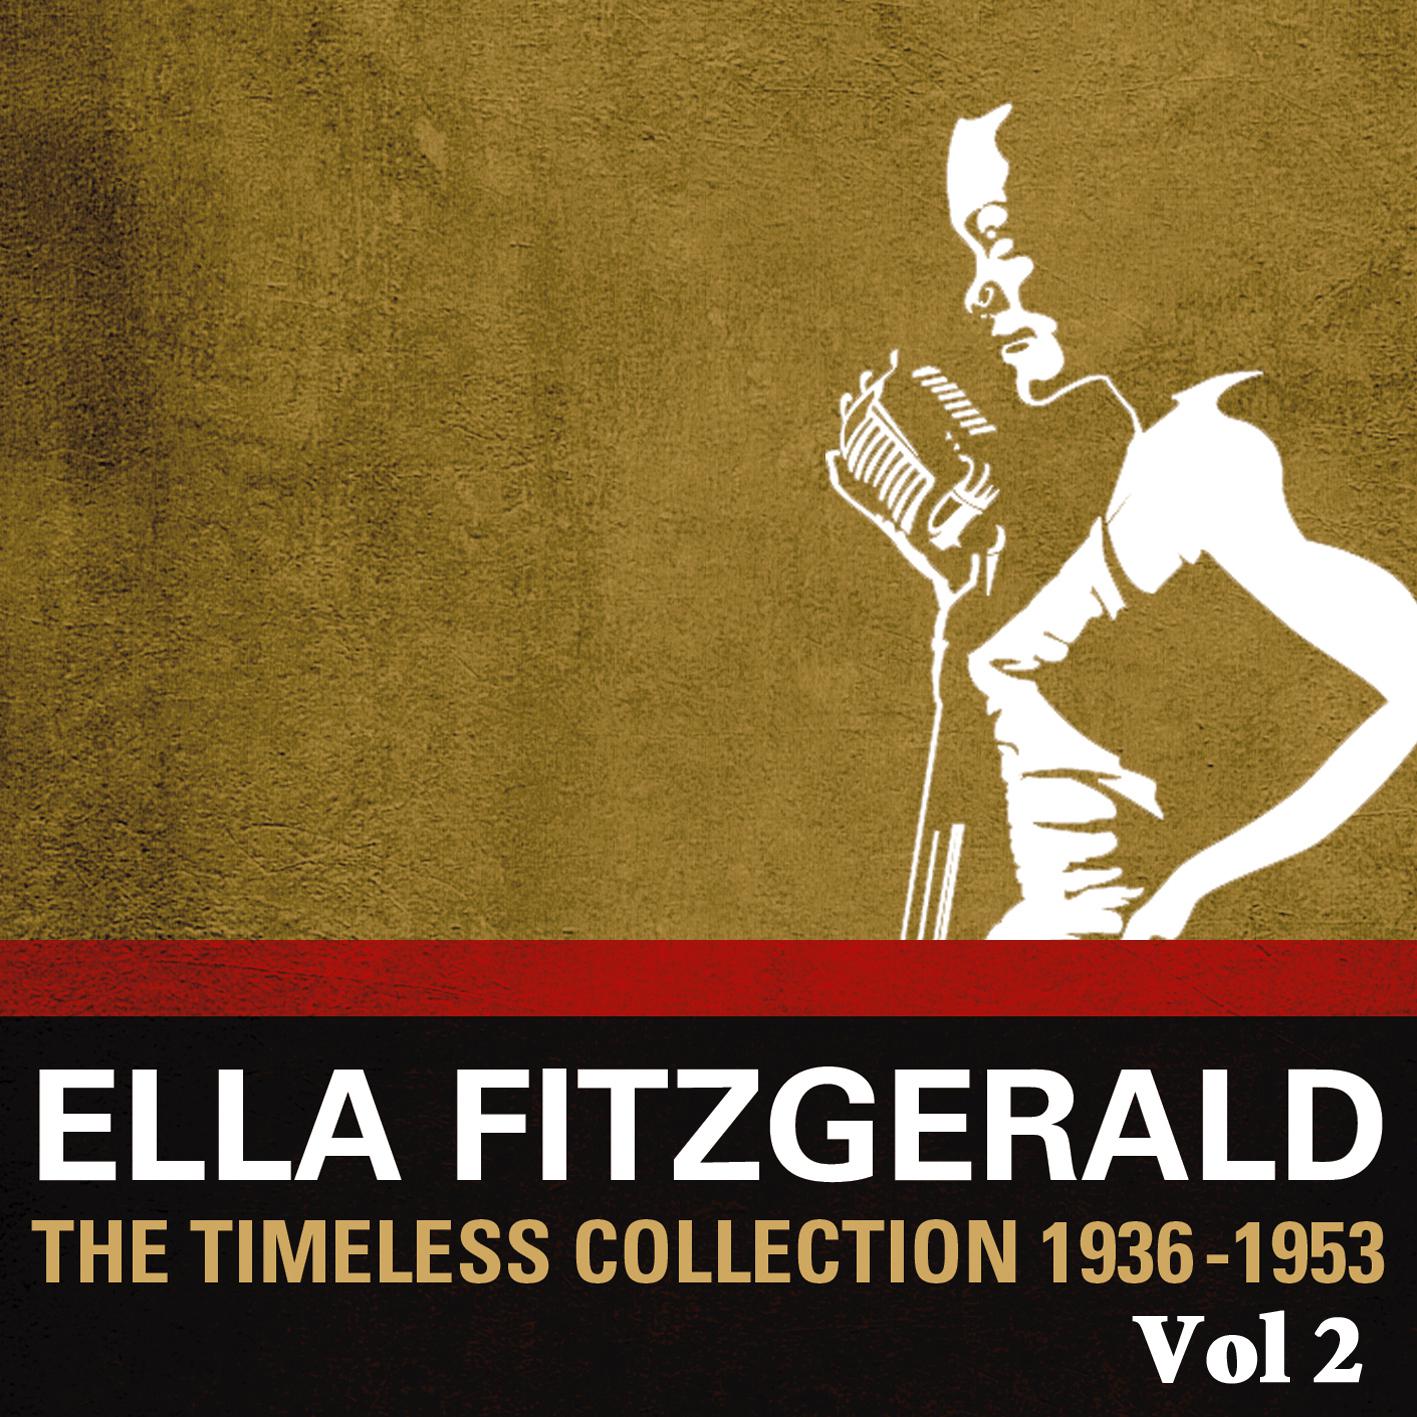 Ella Fitzgerald The Timeless Collection 1936 - 1953 Vol.2